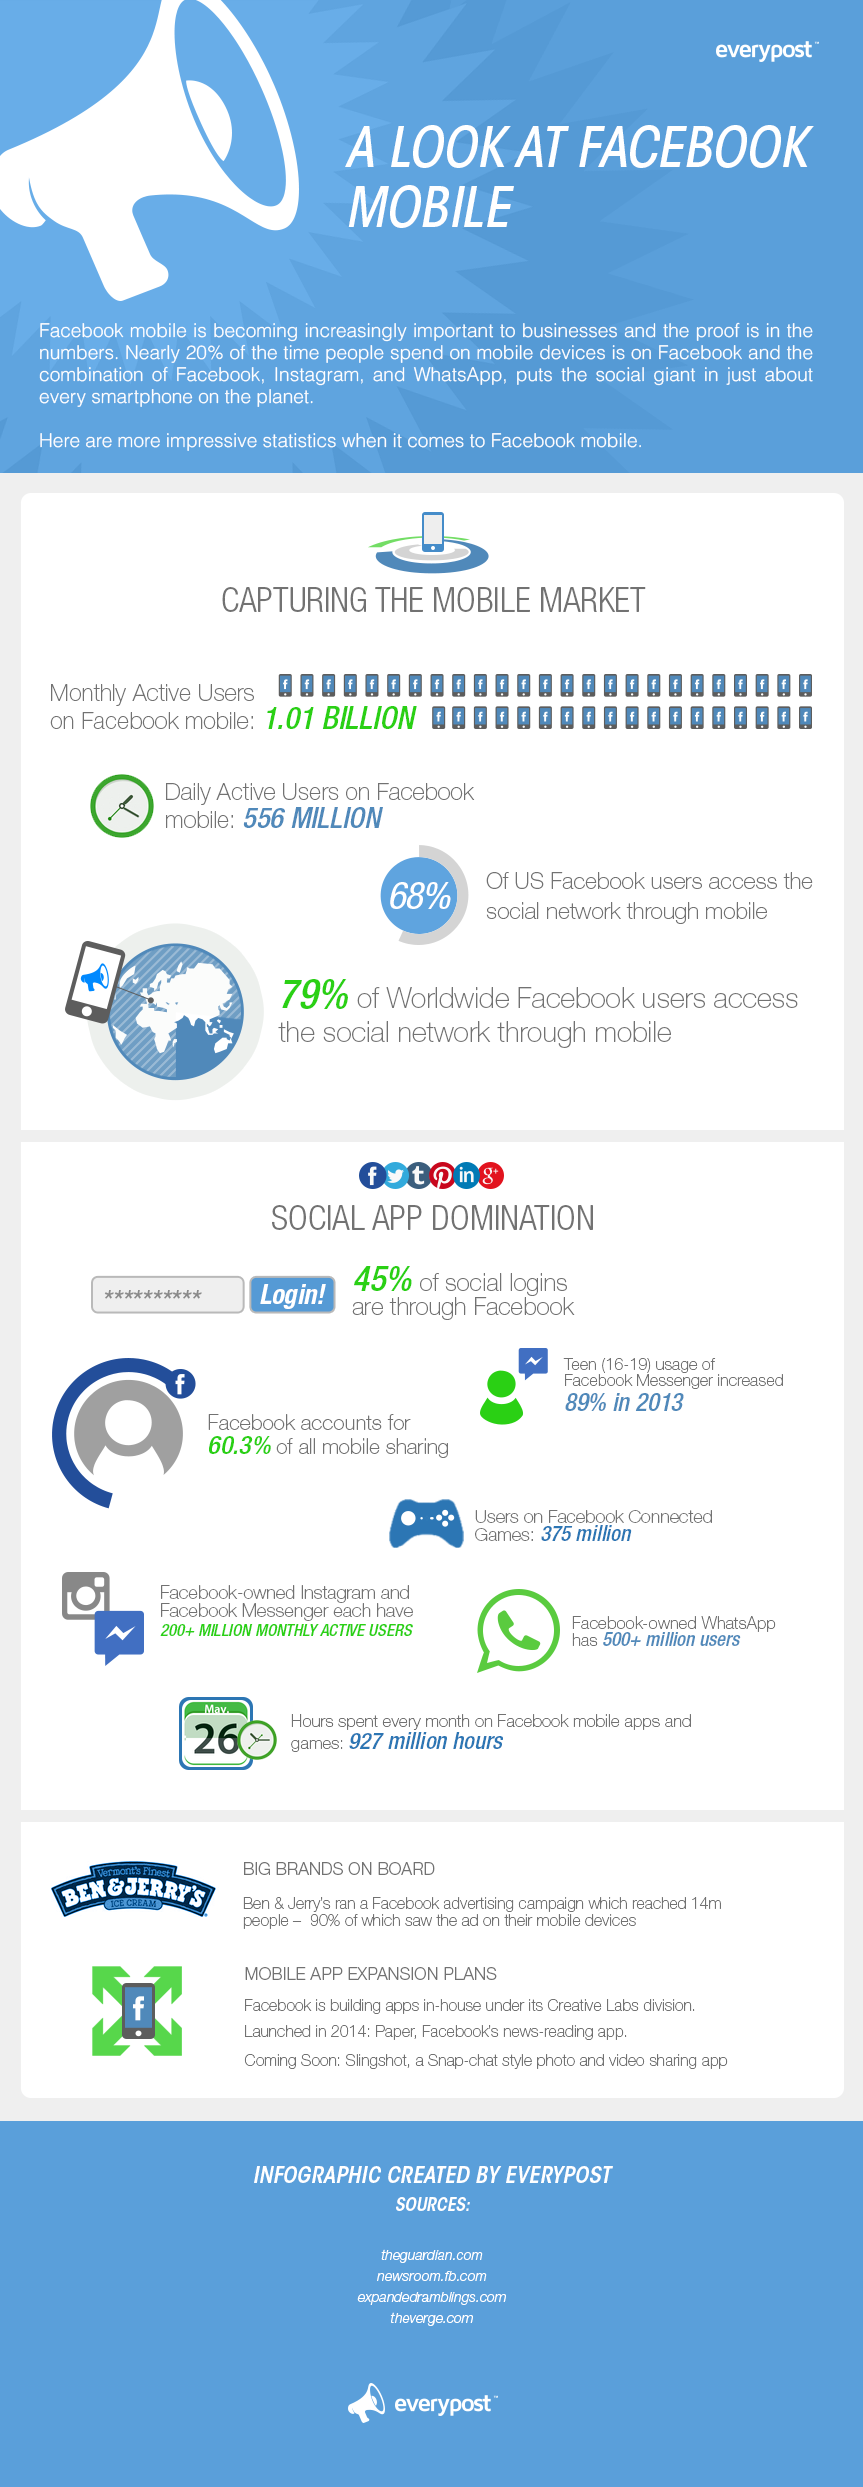 facebook mobile statistics 2014 - infographic by everypost